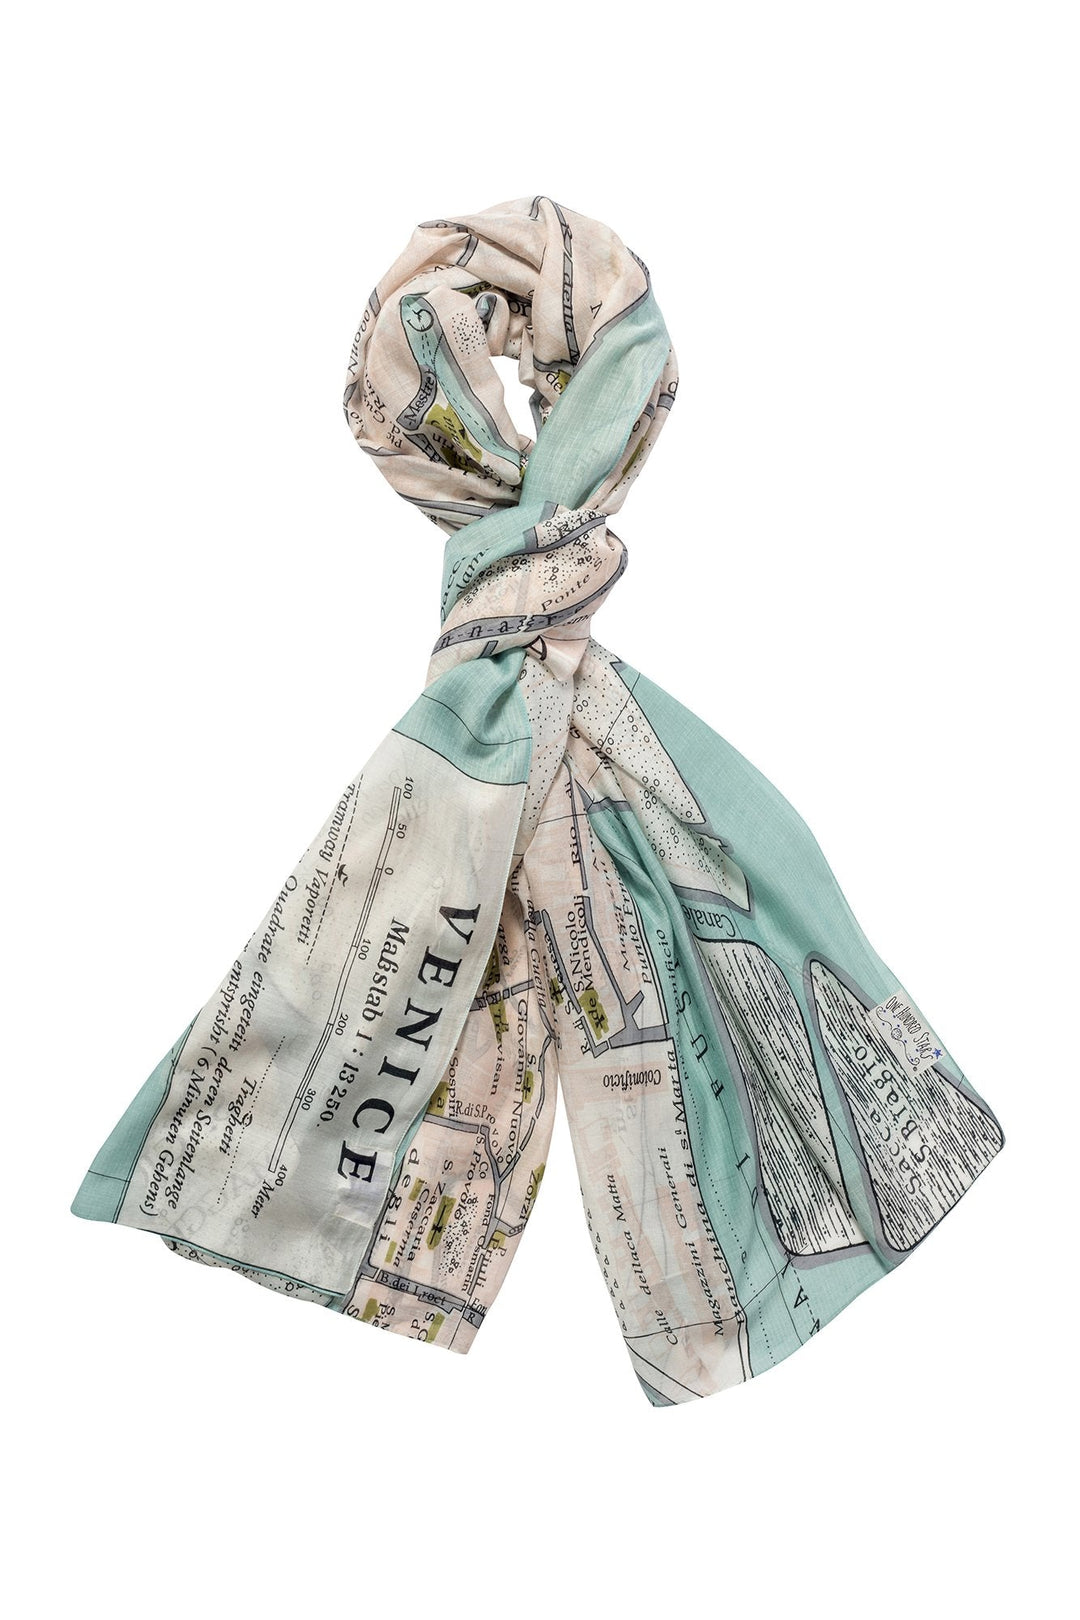 One Hundred Stars Venice Map Scarf- Our scarves are a full 100cm x 200cm making them perfect for layering in the winter months or worn as a delicate cover up during the summer seasons.